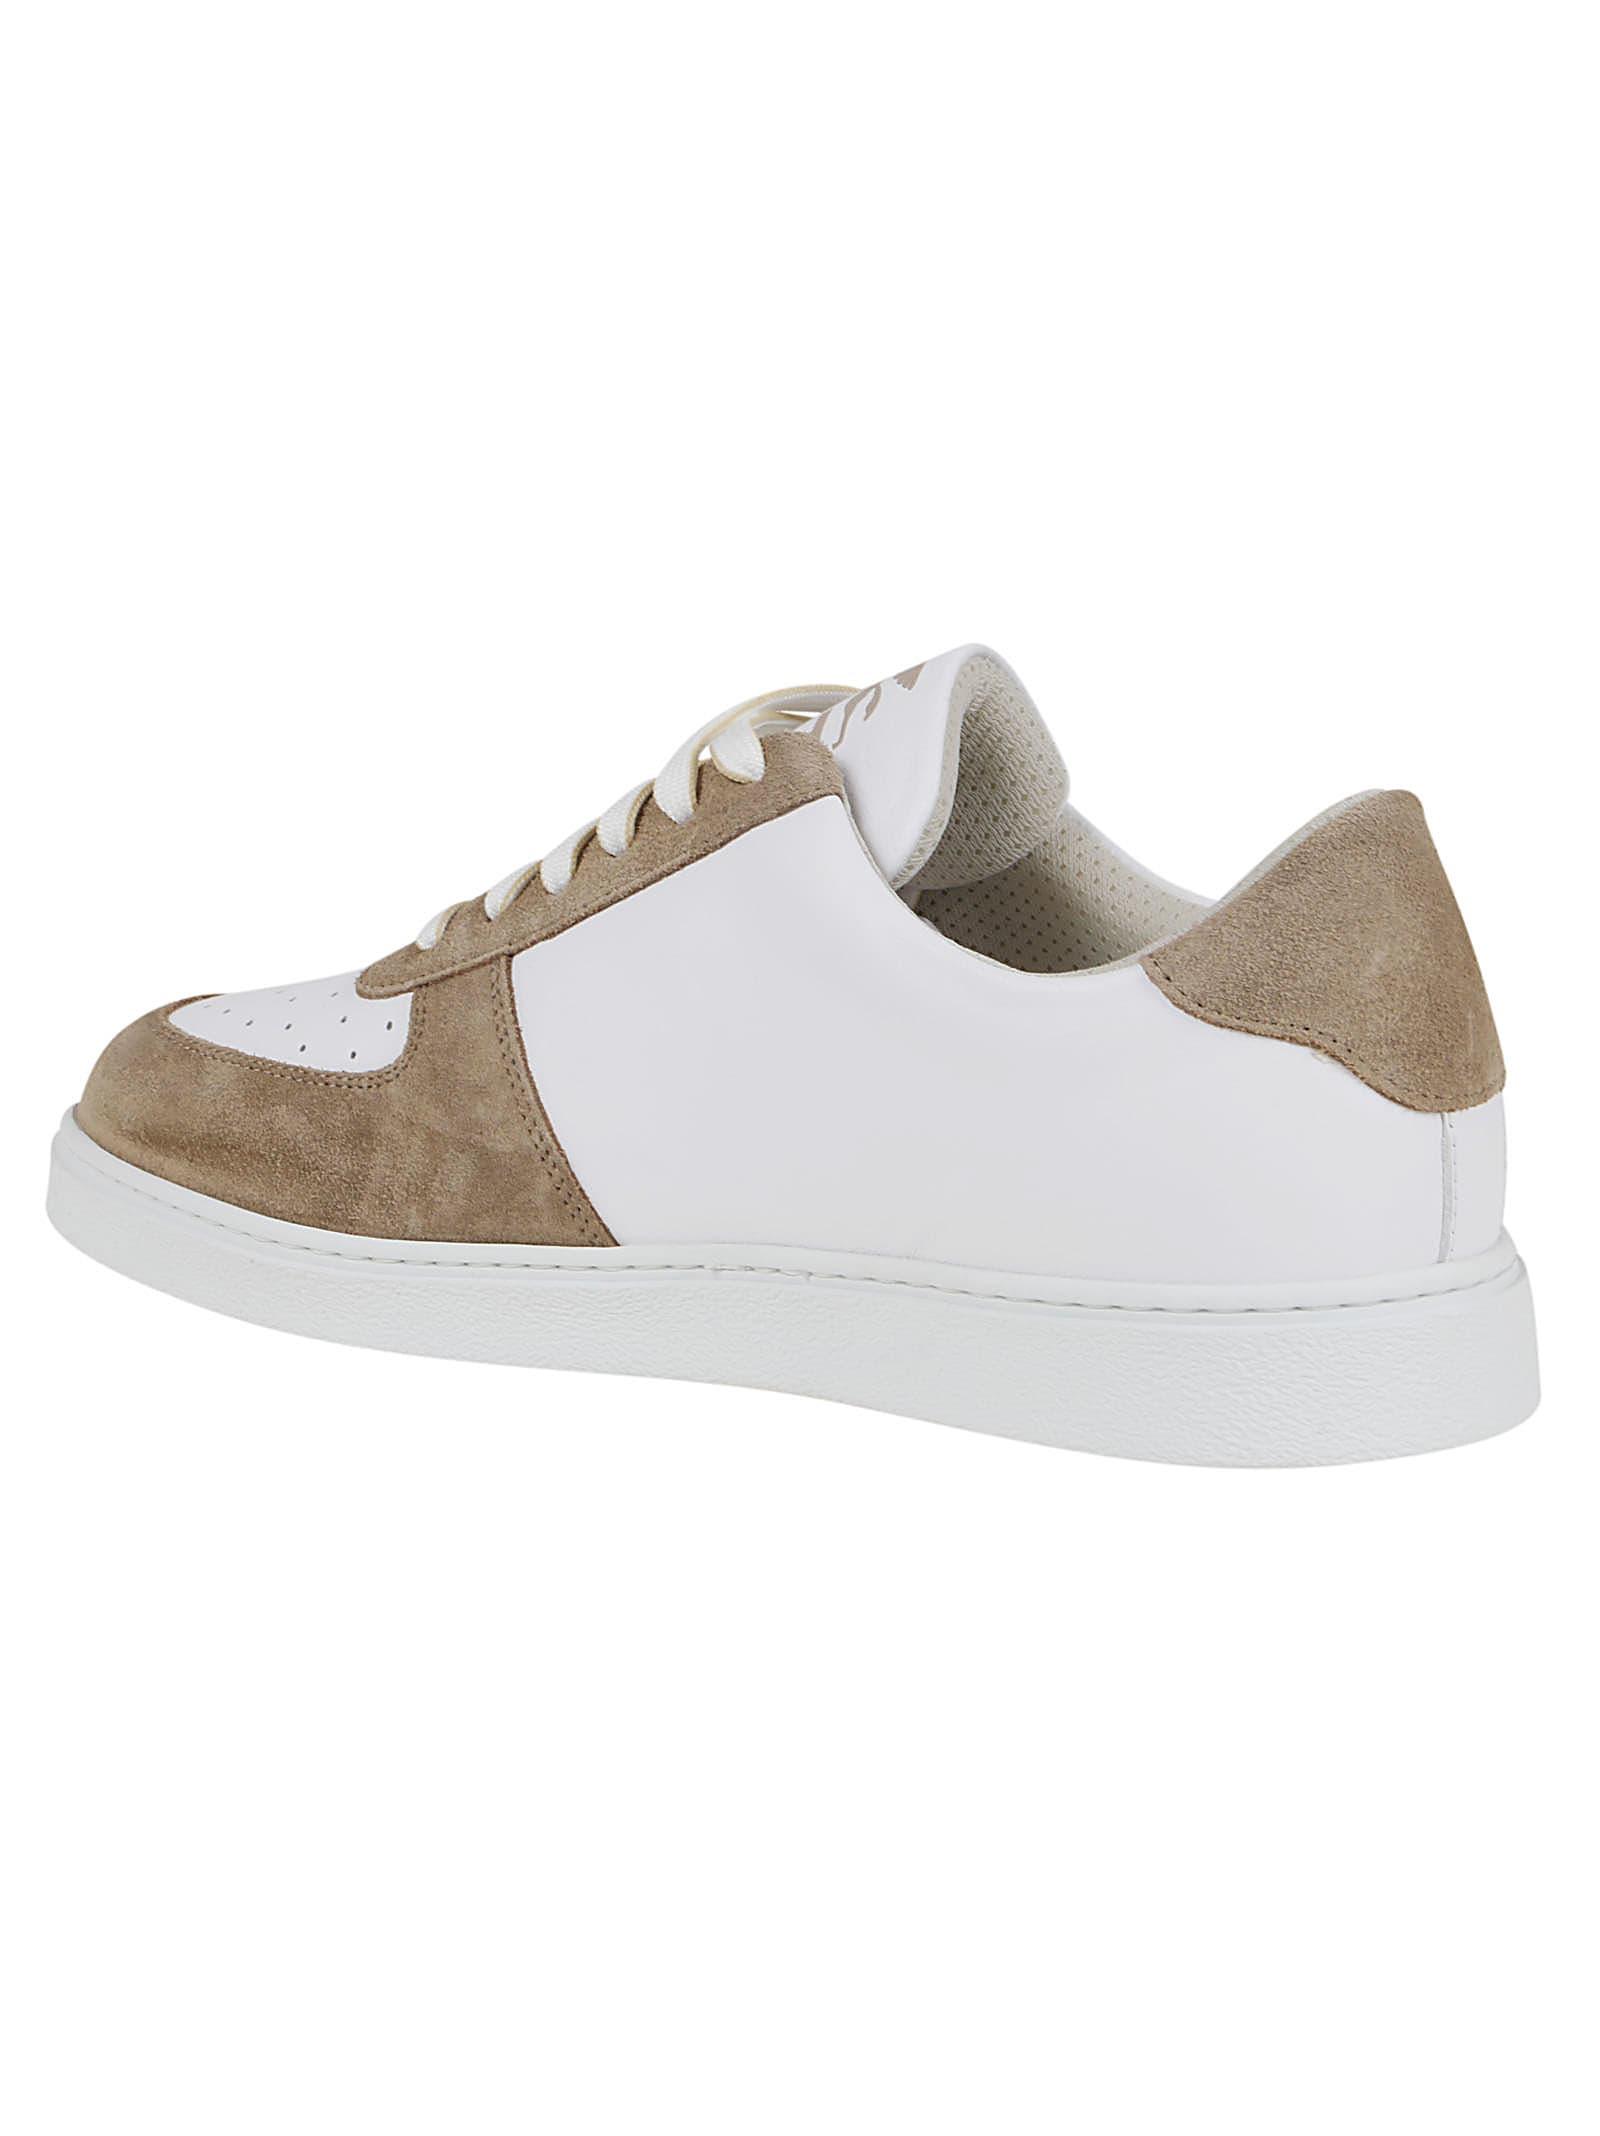 Etro Other Materials Sneakers in White for Men - Save 20% | Lyst